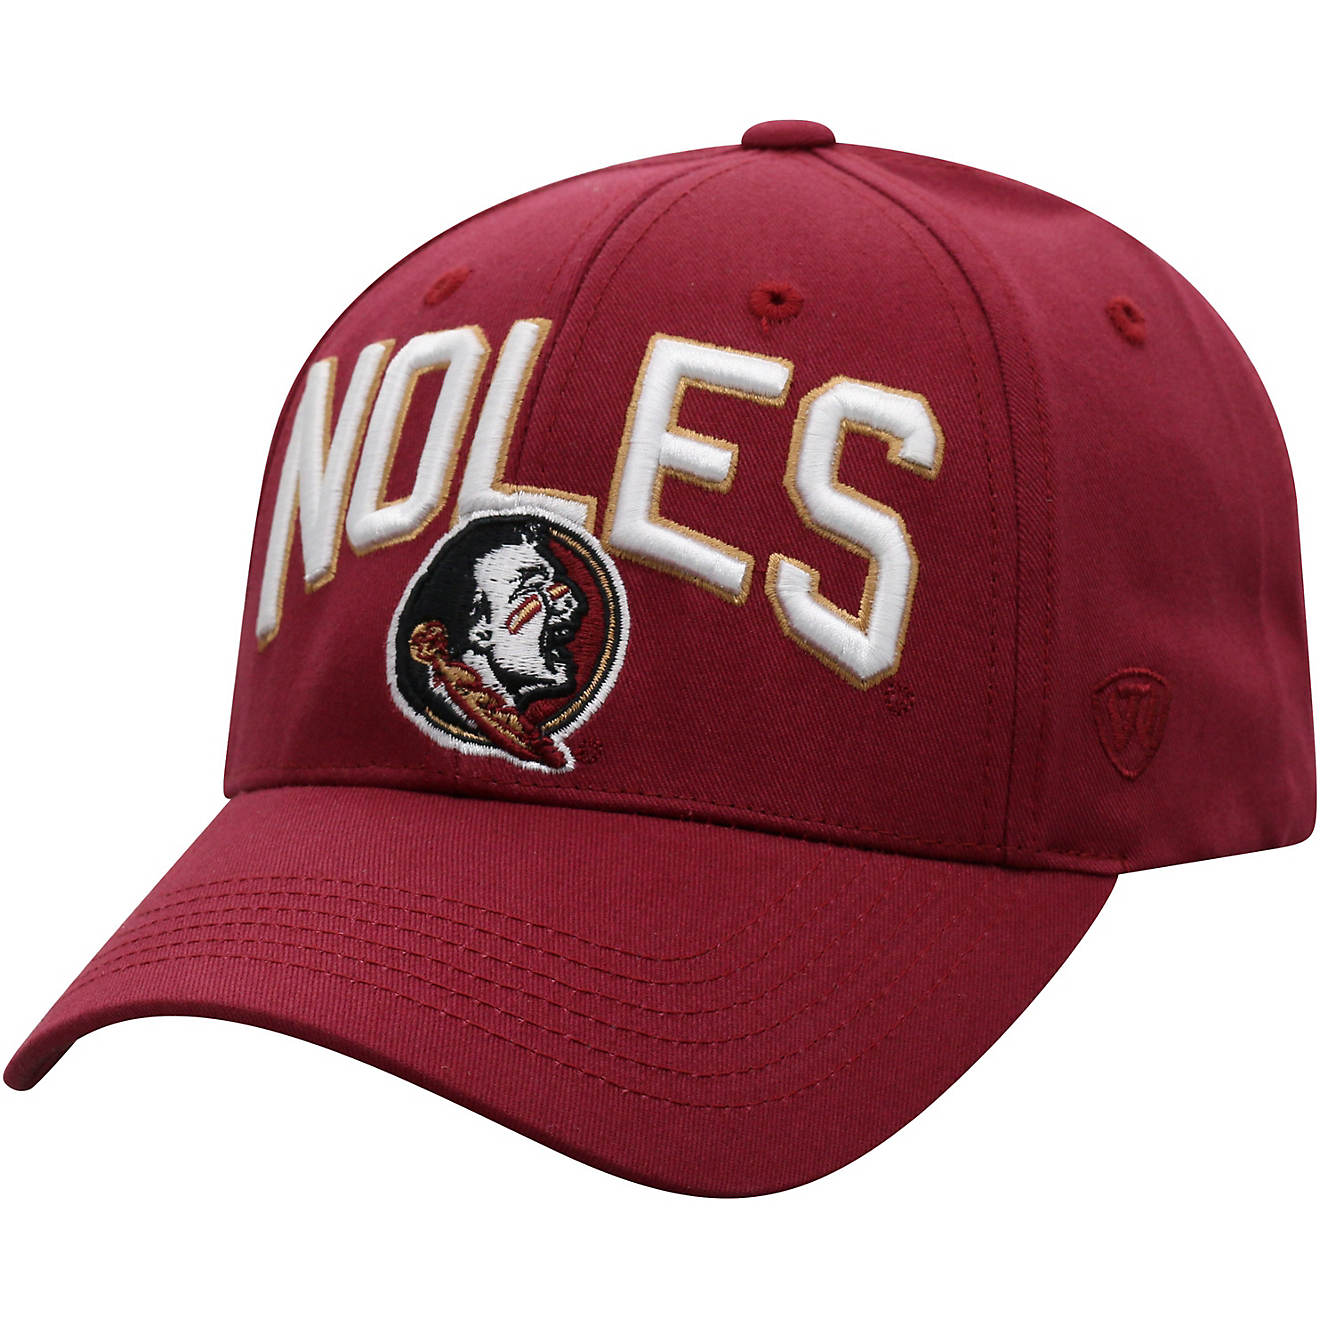 Top of the World Men's Florida State University Overarch Cap                                                                     - view number 1